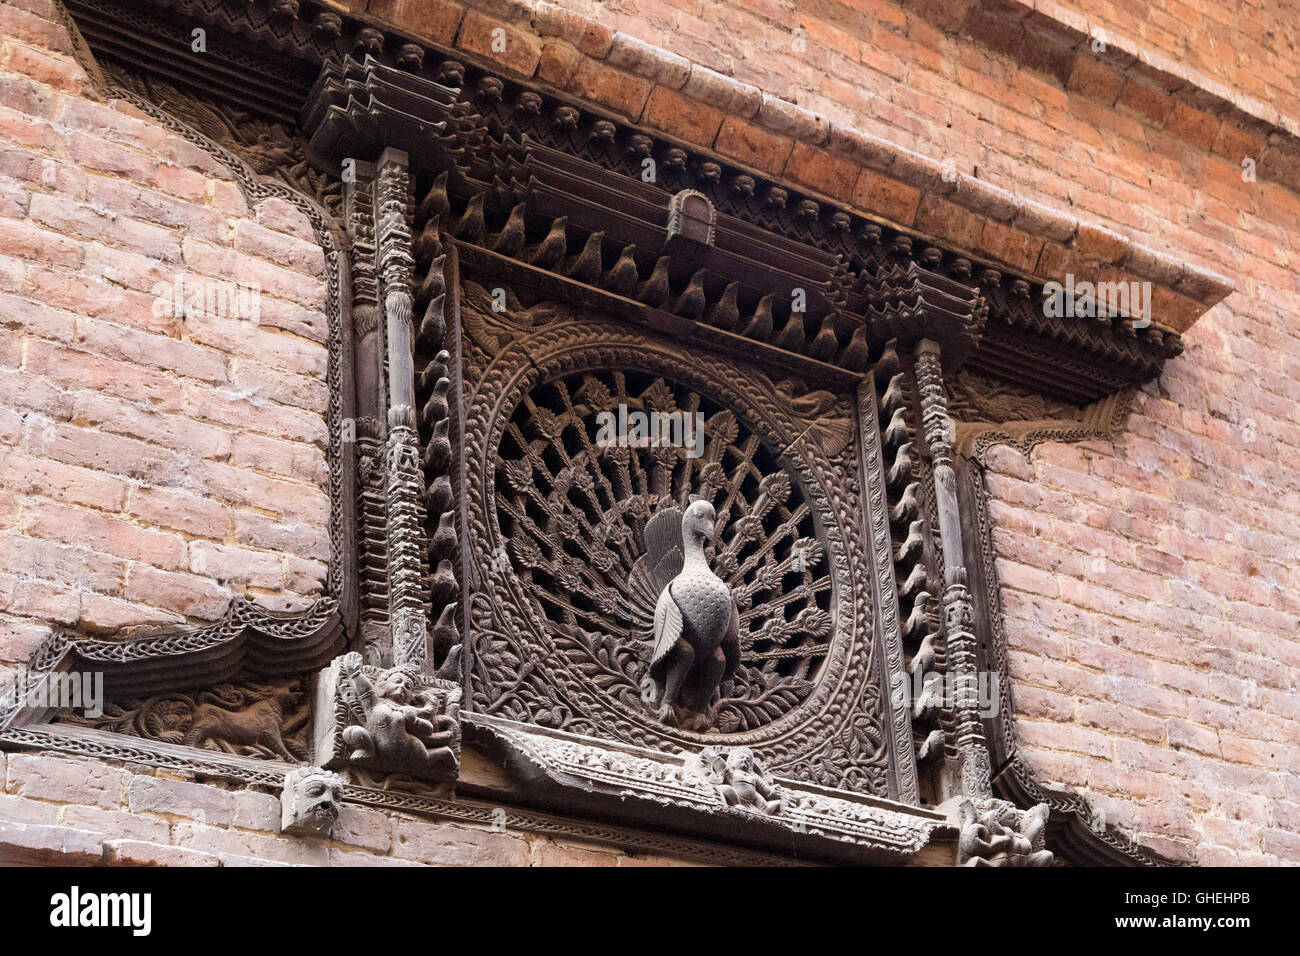 Bhaktapur, Nepal - December 4, 2014: A beautiful carved window called the Peacock window Stock Photo